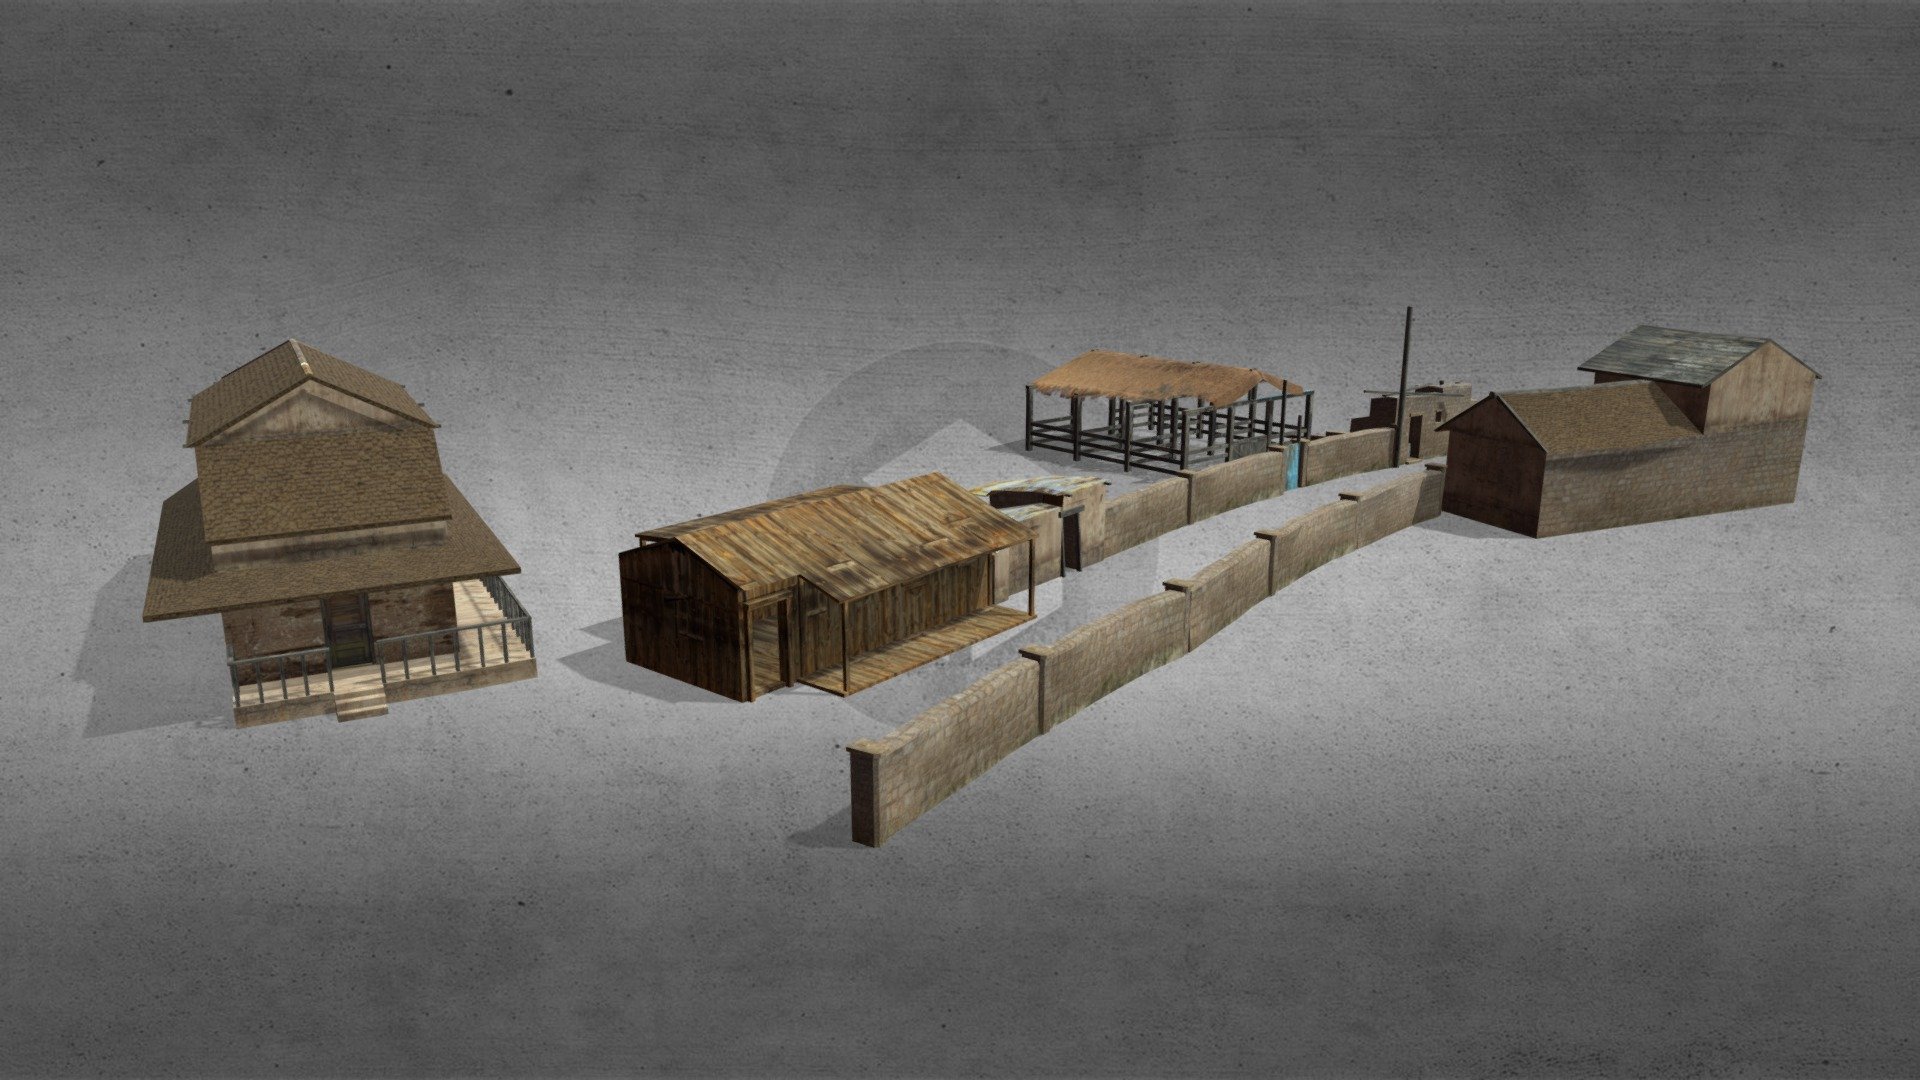 This is a set of farm-style buildings, including a gated barn and houses on the site. Fence sections help herd the animals in the correct direction.

Product Features:




Approx 3,406 polygons.

Made entirely with 3 and 4 point polygons.

Includes group information, which your software should interpret as separate parts for the buildings, fence sections, gates, and rocks.

The model is not rigged.

The model is UV mapped.

Textures and corresponding normal/ bump maps (in jpg format) are included, at 4096x4096 pixels.

Original model by Arteria3D and uploaded for sale here with full permission 3d model